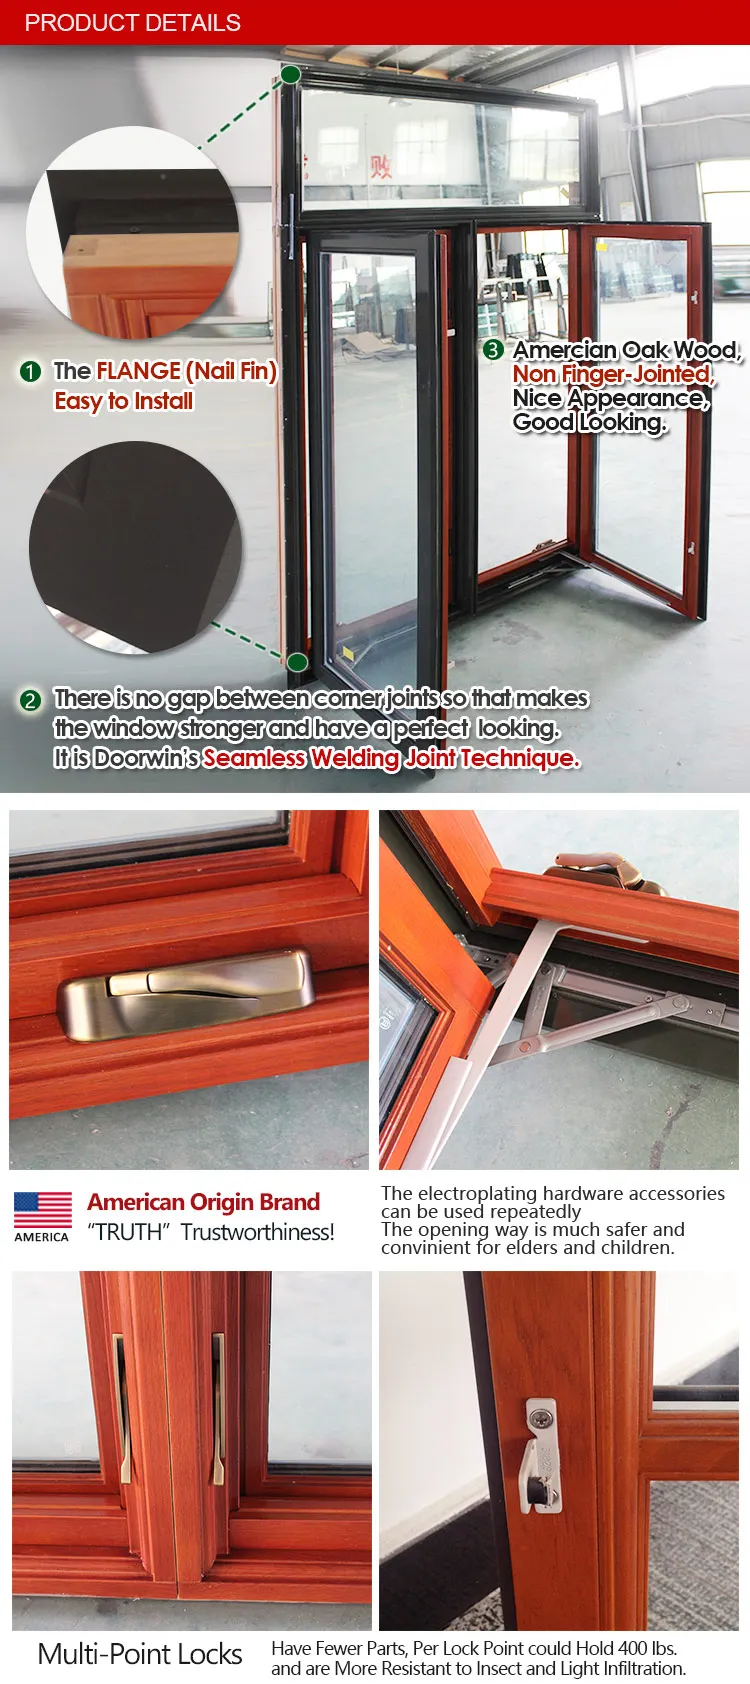 Less labor cost Thermal break aluminium crank handle outward casement house windows with Flange Nail Fin